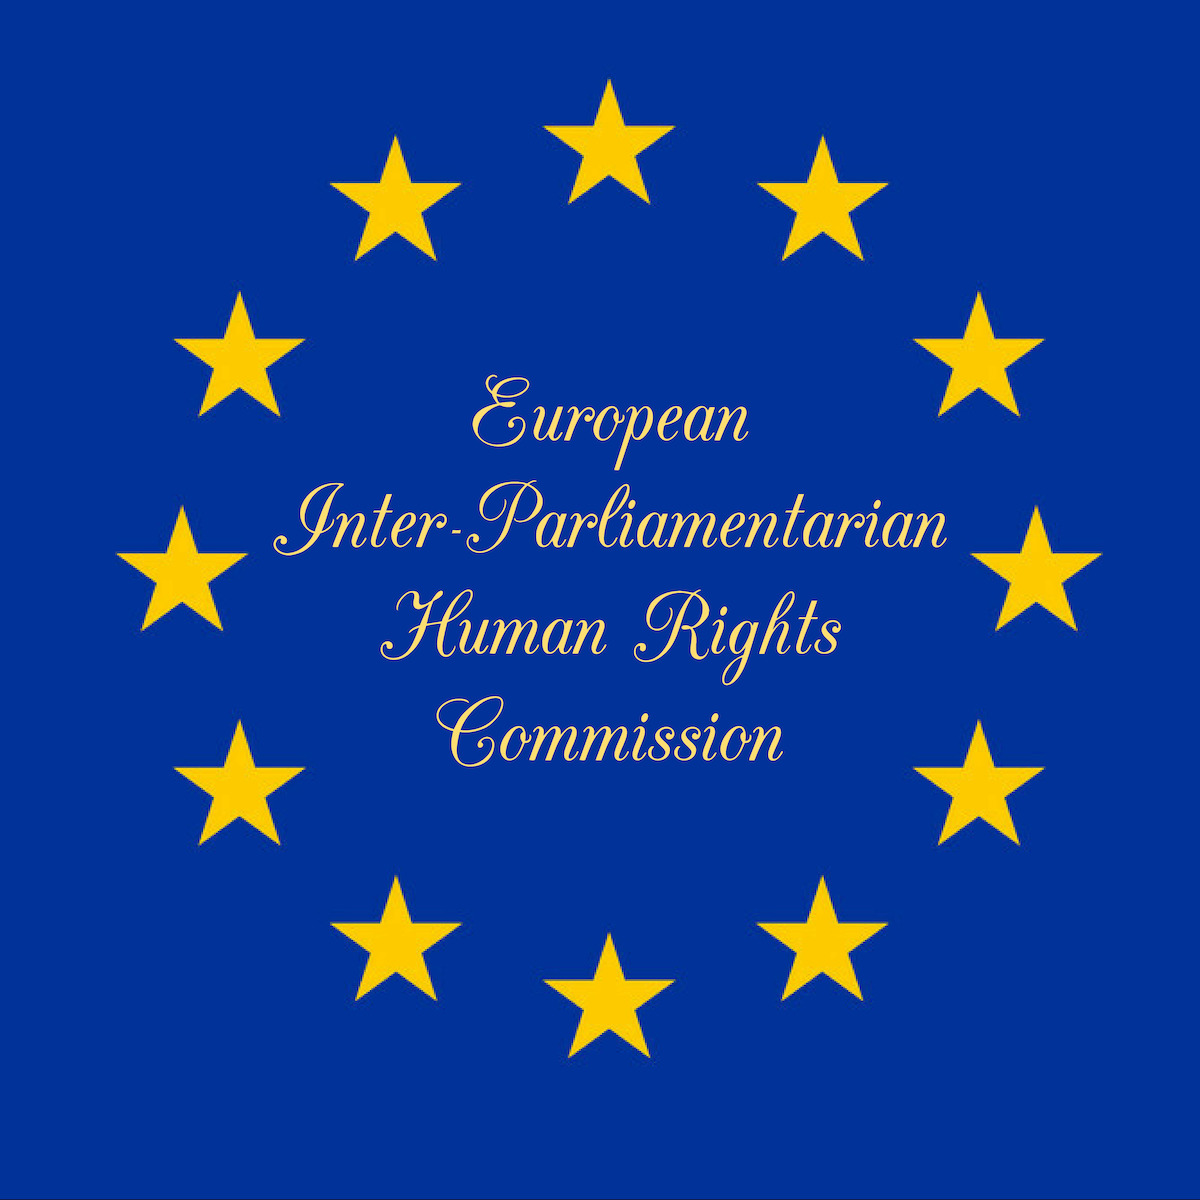 Global Peace Foundation | European Inter-Parliamentarian Human Rights Commission